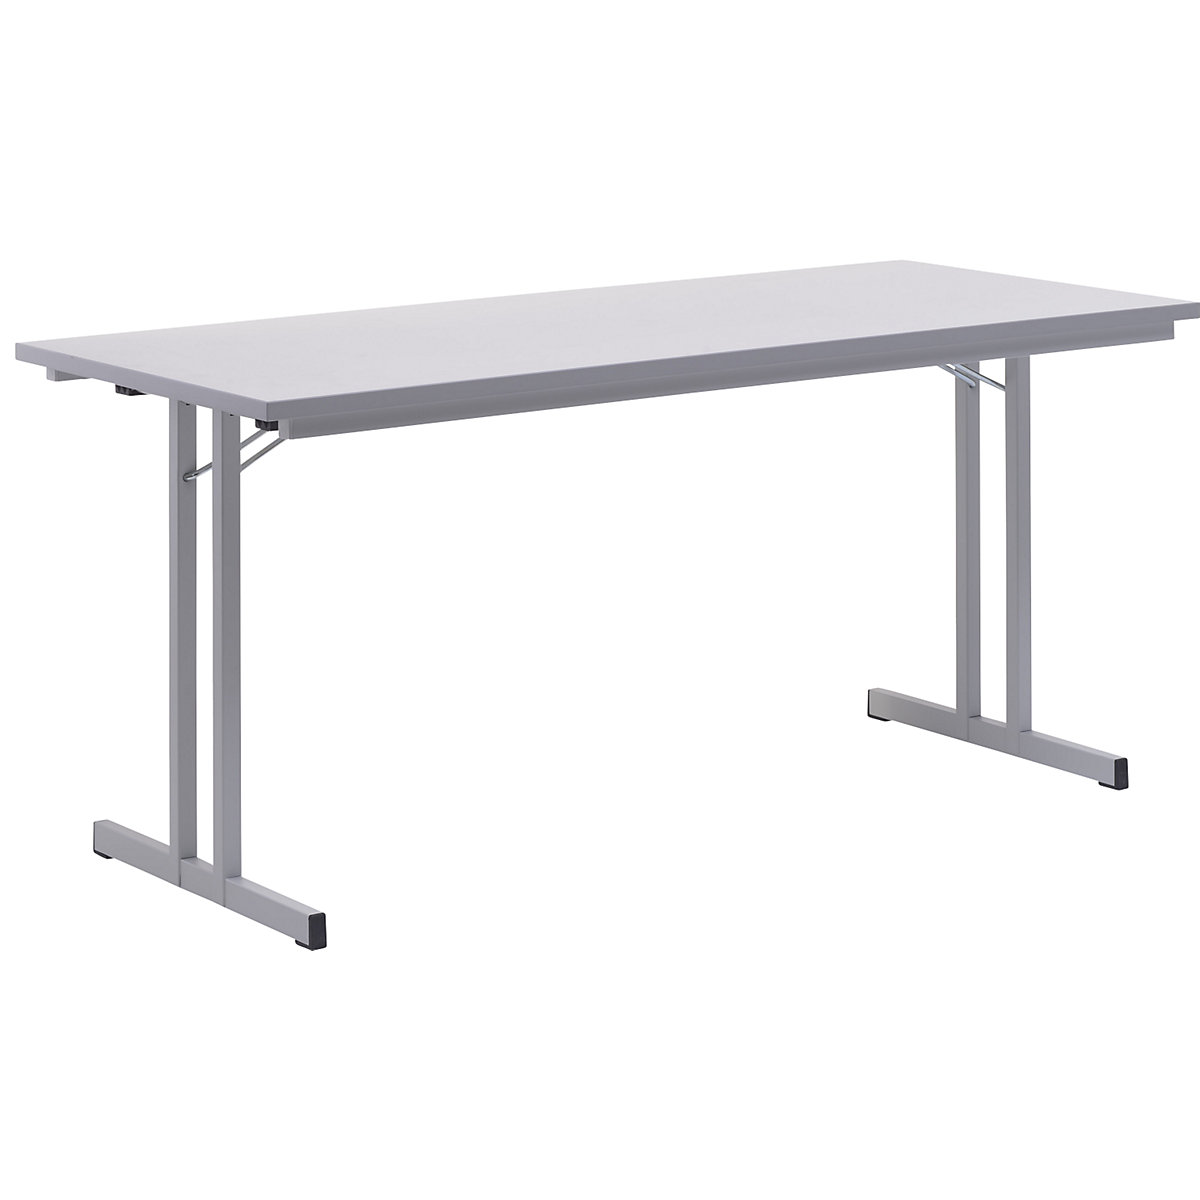 Folding table, with extra thick tabletop, height 720 mm, 1600 x 700 mm, light grey frame, light grey tabletop-9